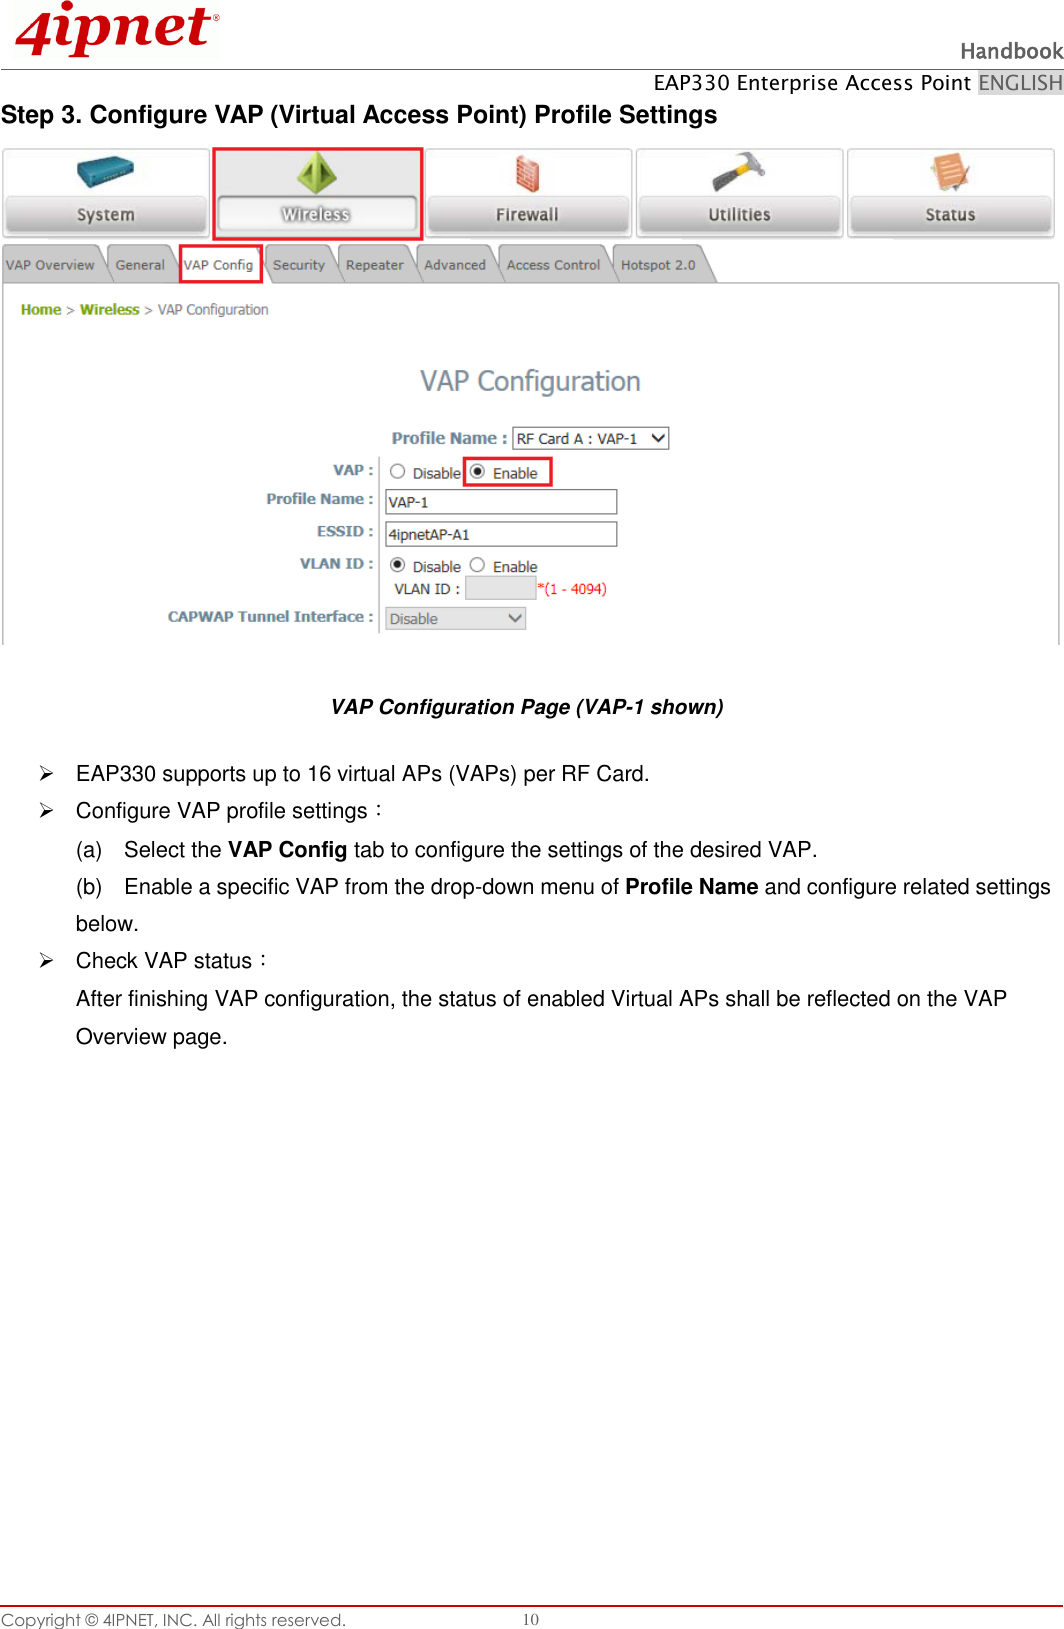  Handbook EAP330 Enterprise Access Point ENGLISH Copyright ©  4IPNET, INC. All rights reserved.   10 Step 3. Configure VAP (Virtual Access Point) Profile Settings  VAP Configuration Page (VAP-1 shown)   EAP330 supports up to 16 virtual APs (VAPs) per RF Card.    Configure VAP profile settings： (a)    Select the VAP Config tab to configure the settings of the desired VAP.   (b)    Enable a specific VAP from the drop-down menu of Profile Name and configure related settings below.   Check VAP status： After finishing VAP configuration, the status of enabled Virtual APs shall be reflected on the VAP Overview page.   